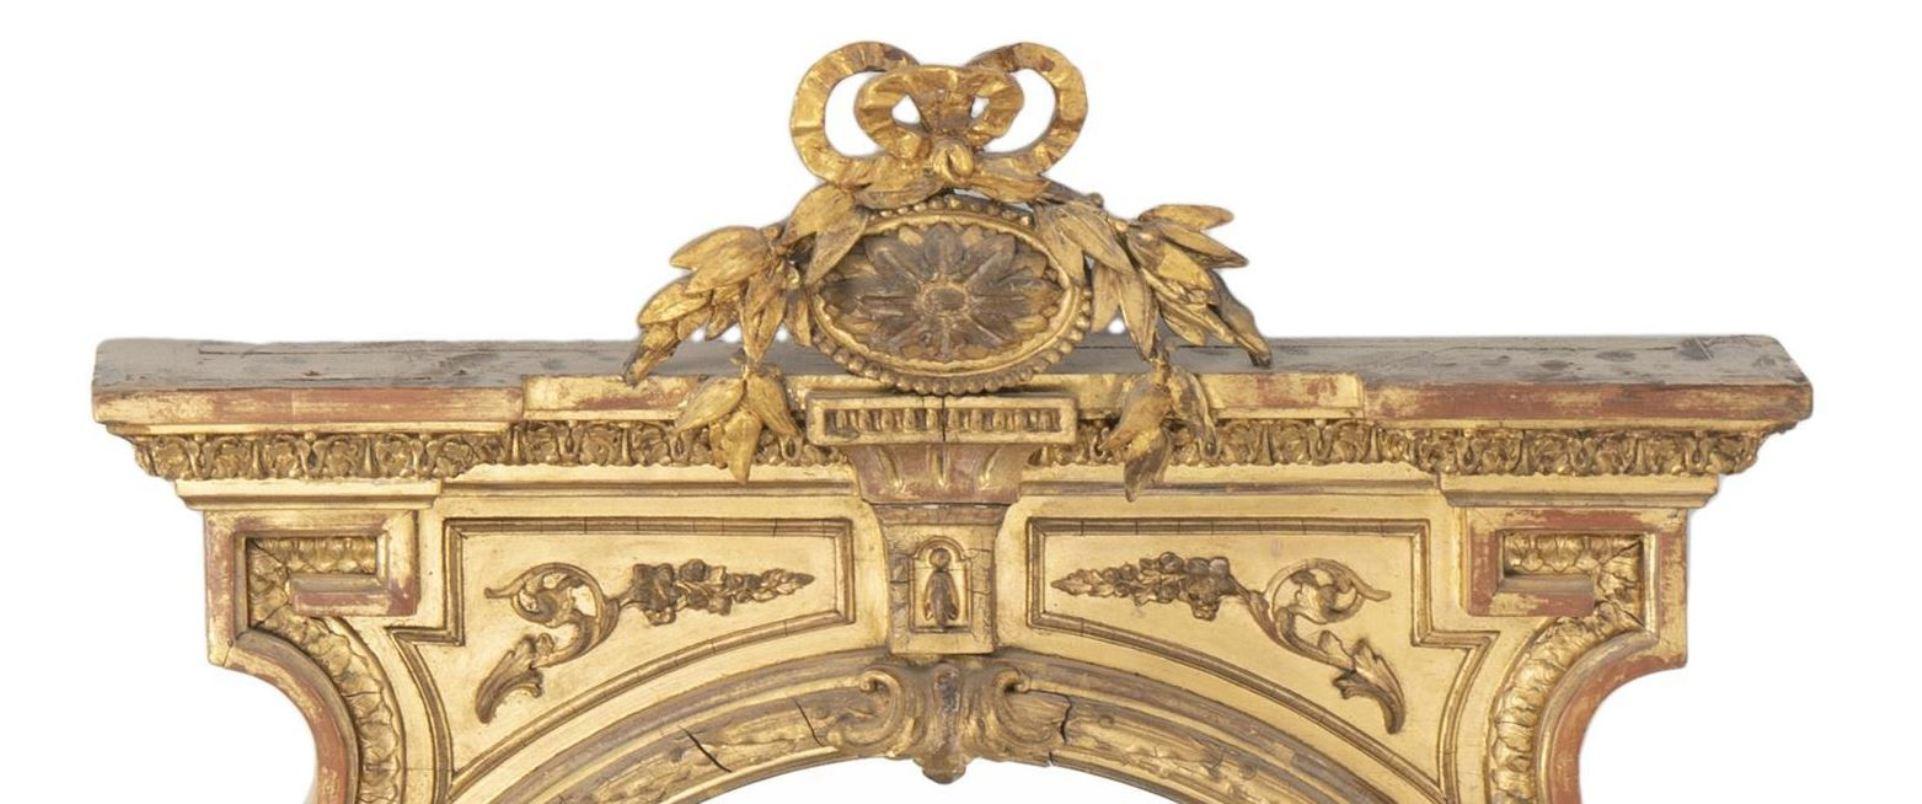 Hand-Carved Neoclassical-Style Carved and Gilt Mirror, 19th Century